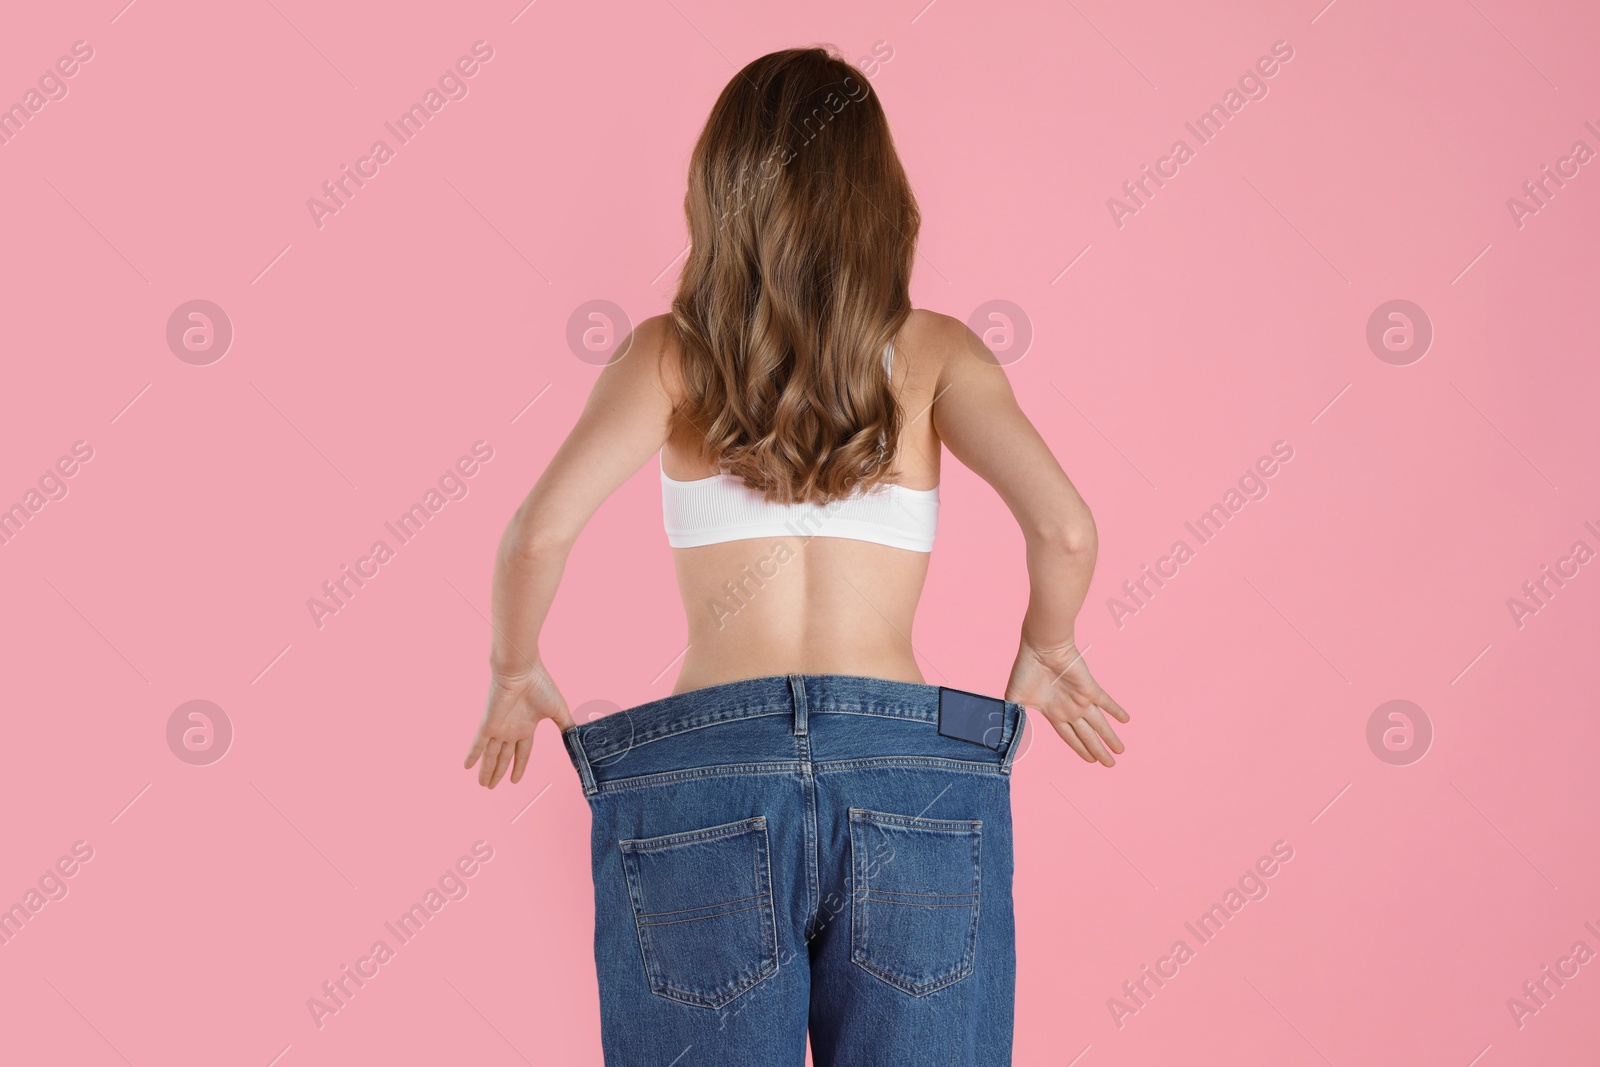 Photo of Woman in big jeans showing her slim body on pink background, back view